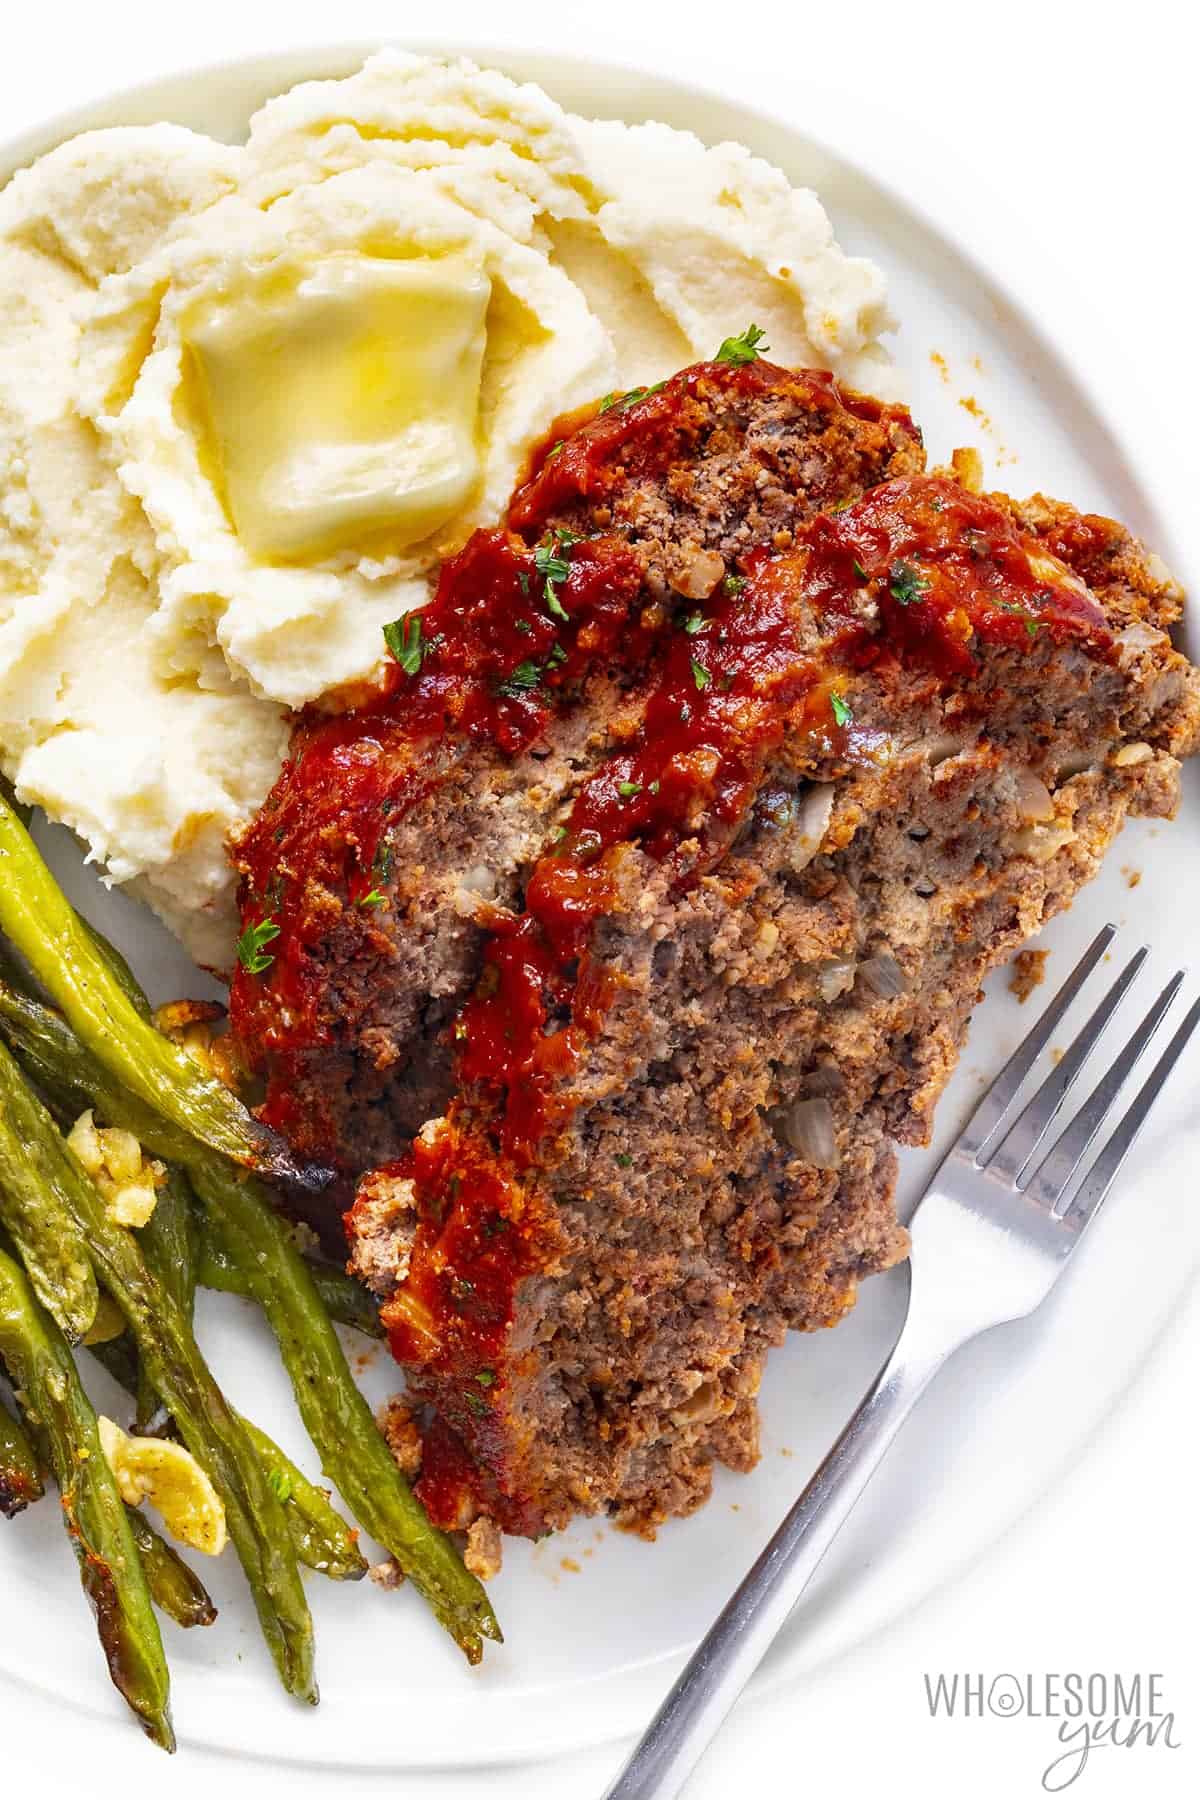 Slices of keto friendly meatloaf with green beans and mashed cauliflower.